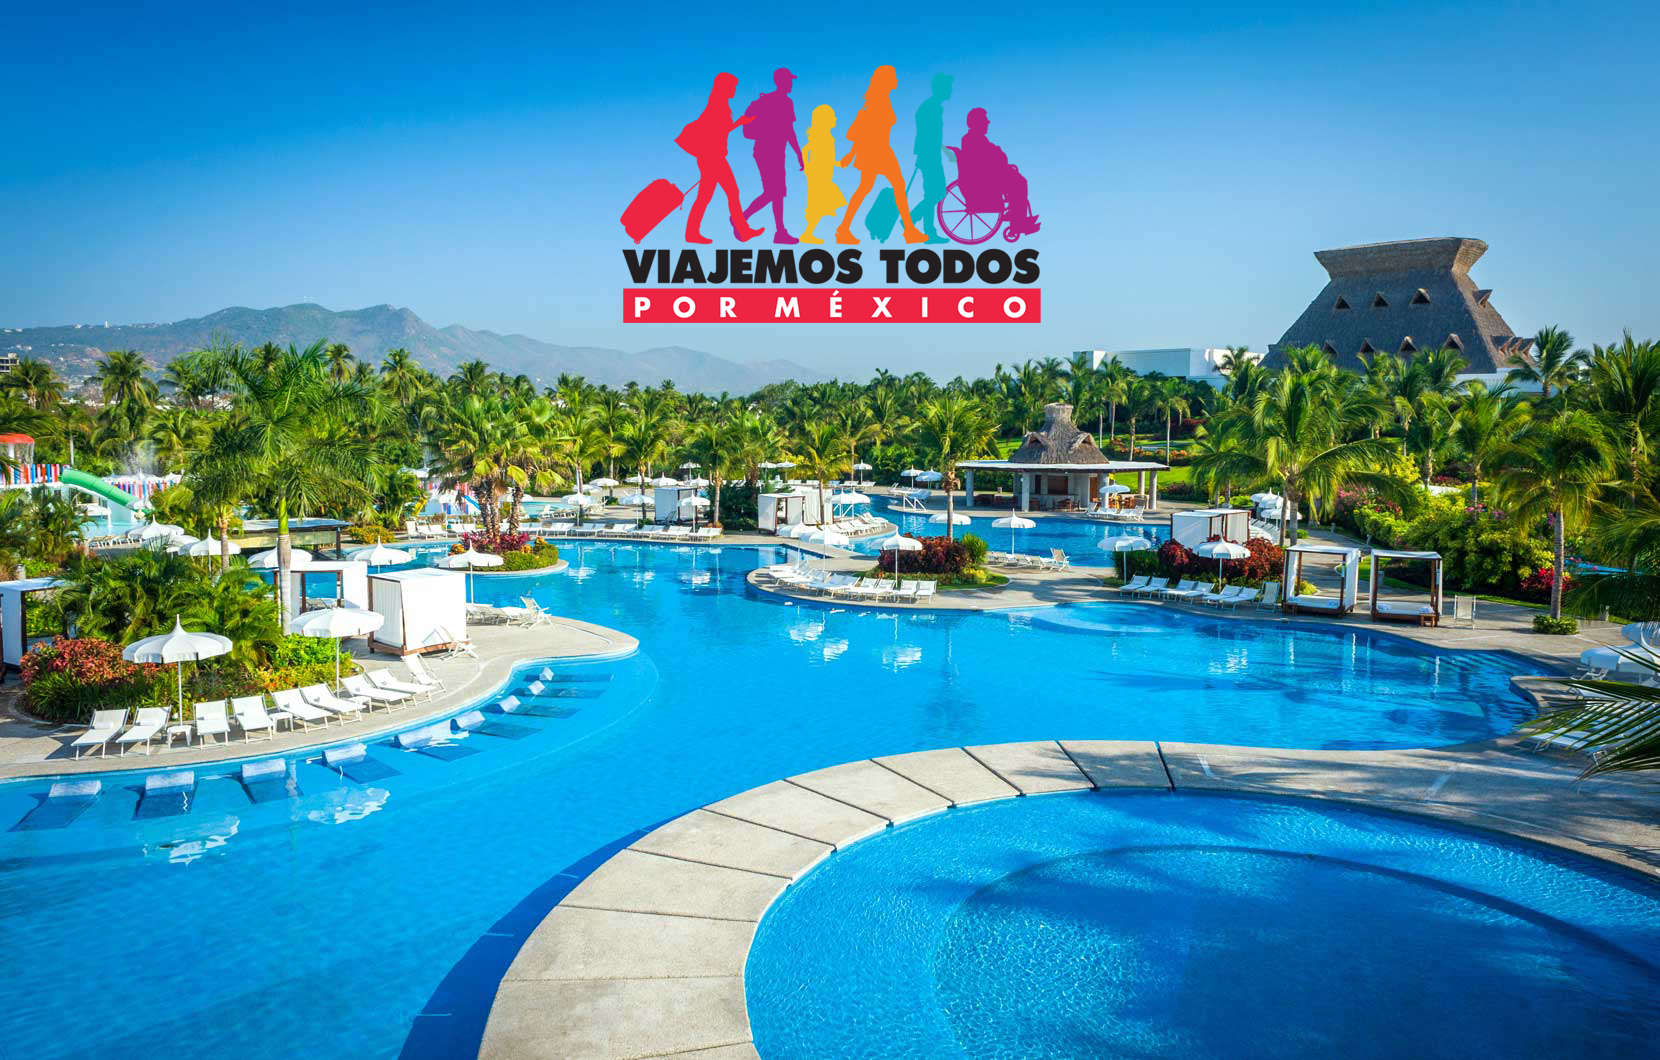 Viajemos Todos Por Mexico is dedicated to helping Mexicans from all walks of life experience everything the country has to offer.